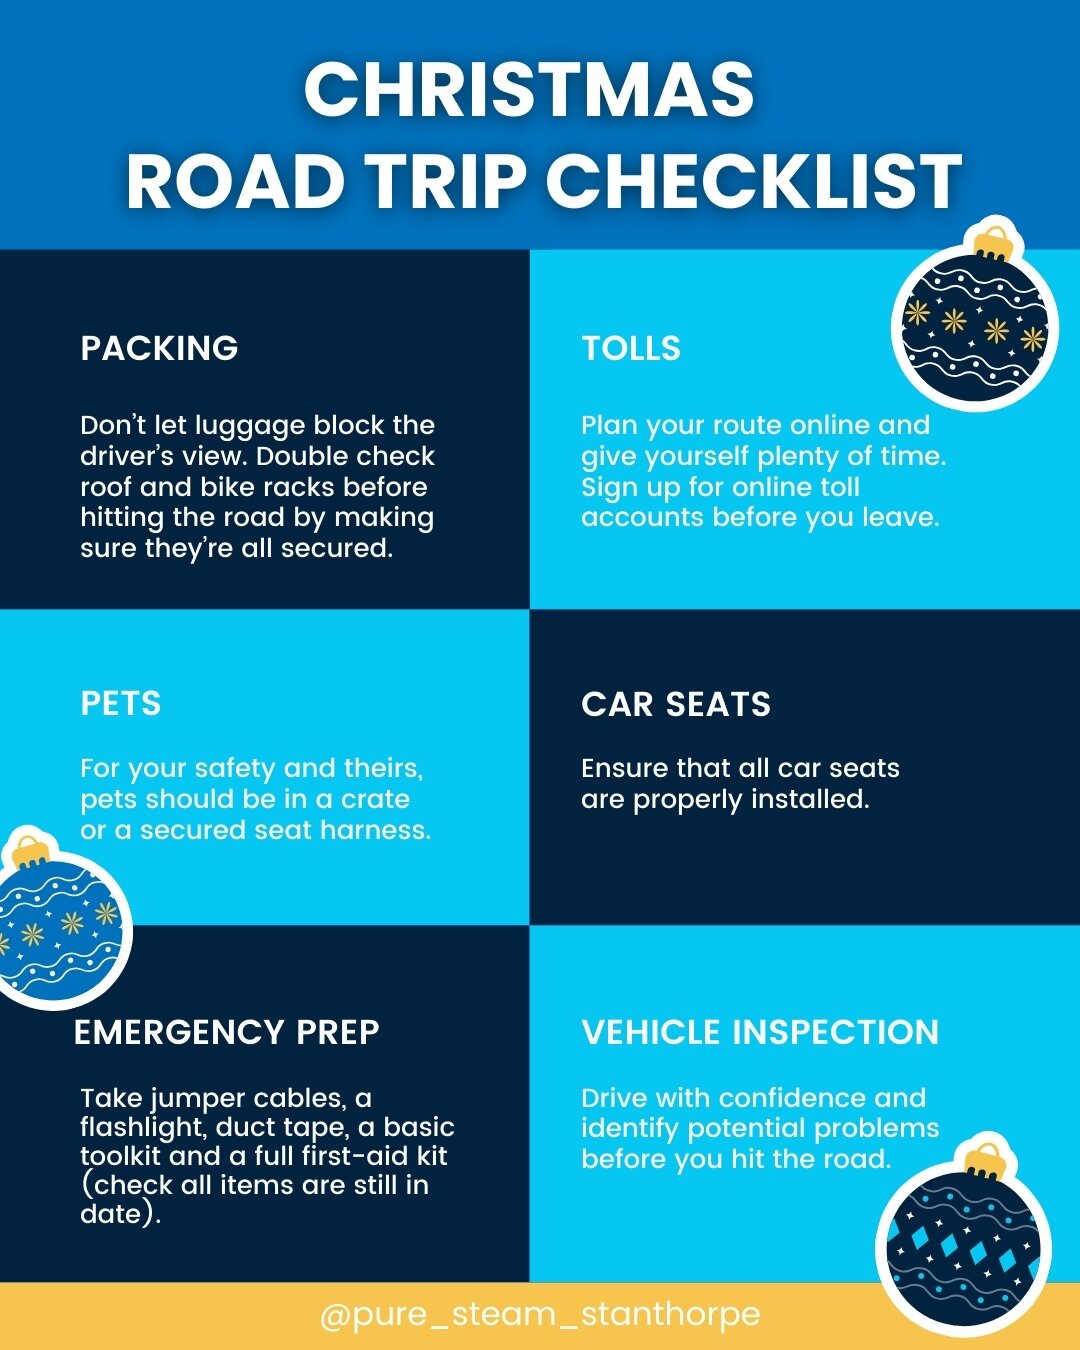 Just a quick heads-up before you hit the road for your December adventures! Make sure you're prepared for a safe and enjoyable journey! 🚗✨⁠
⁠
Check out my checklist to get your car road trip-ready 👀⁠
⁠
We find it really important before embarking o